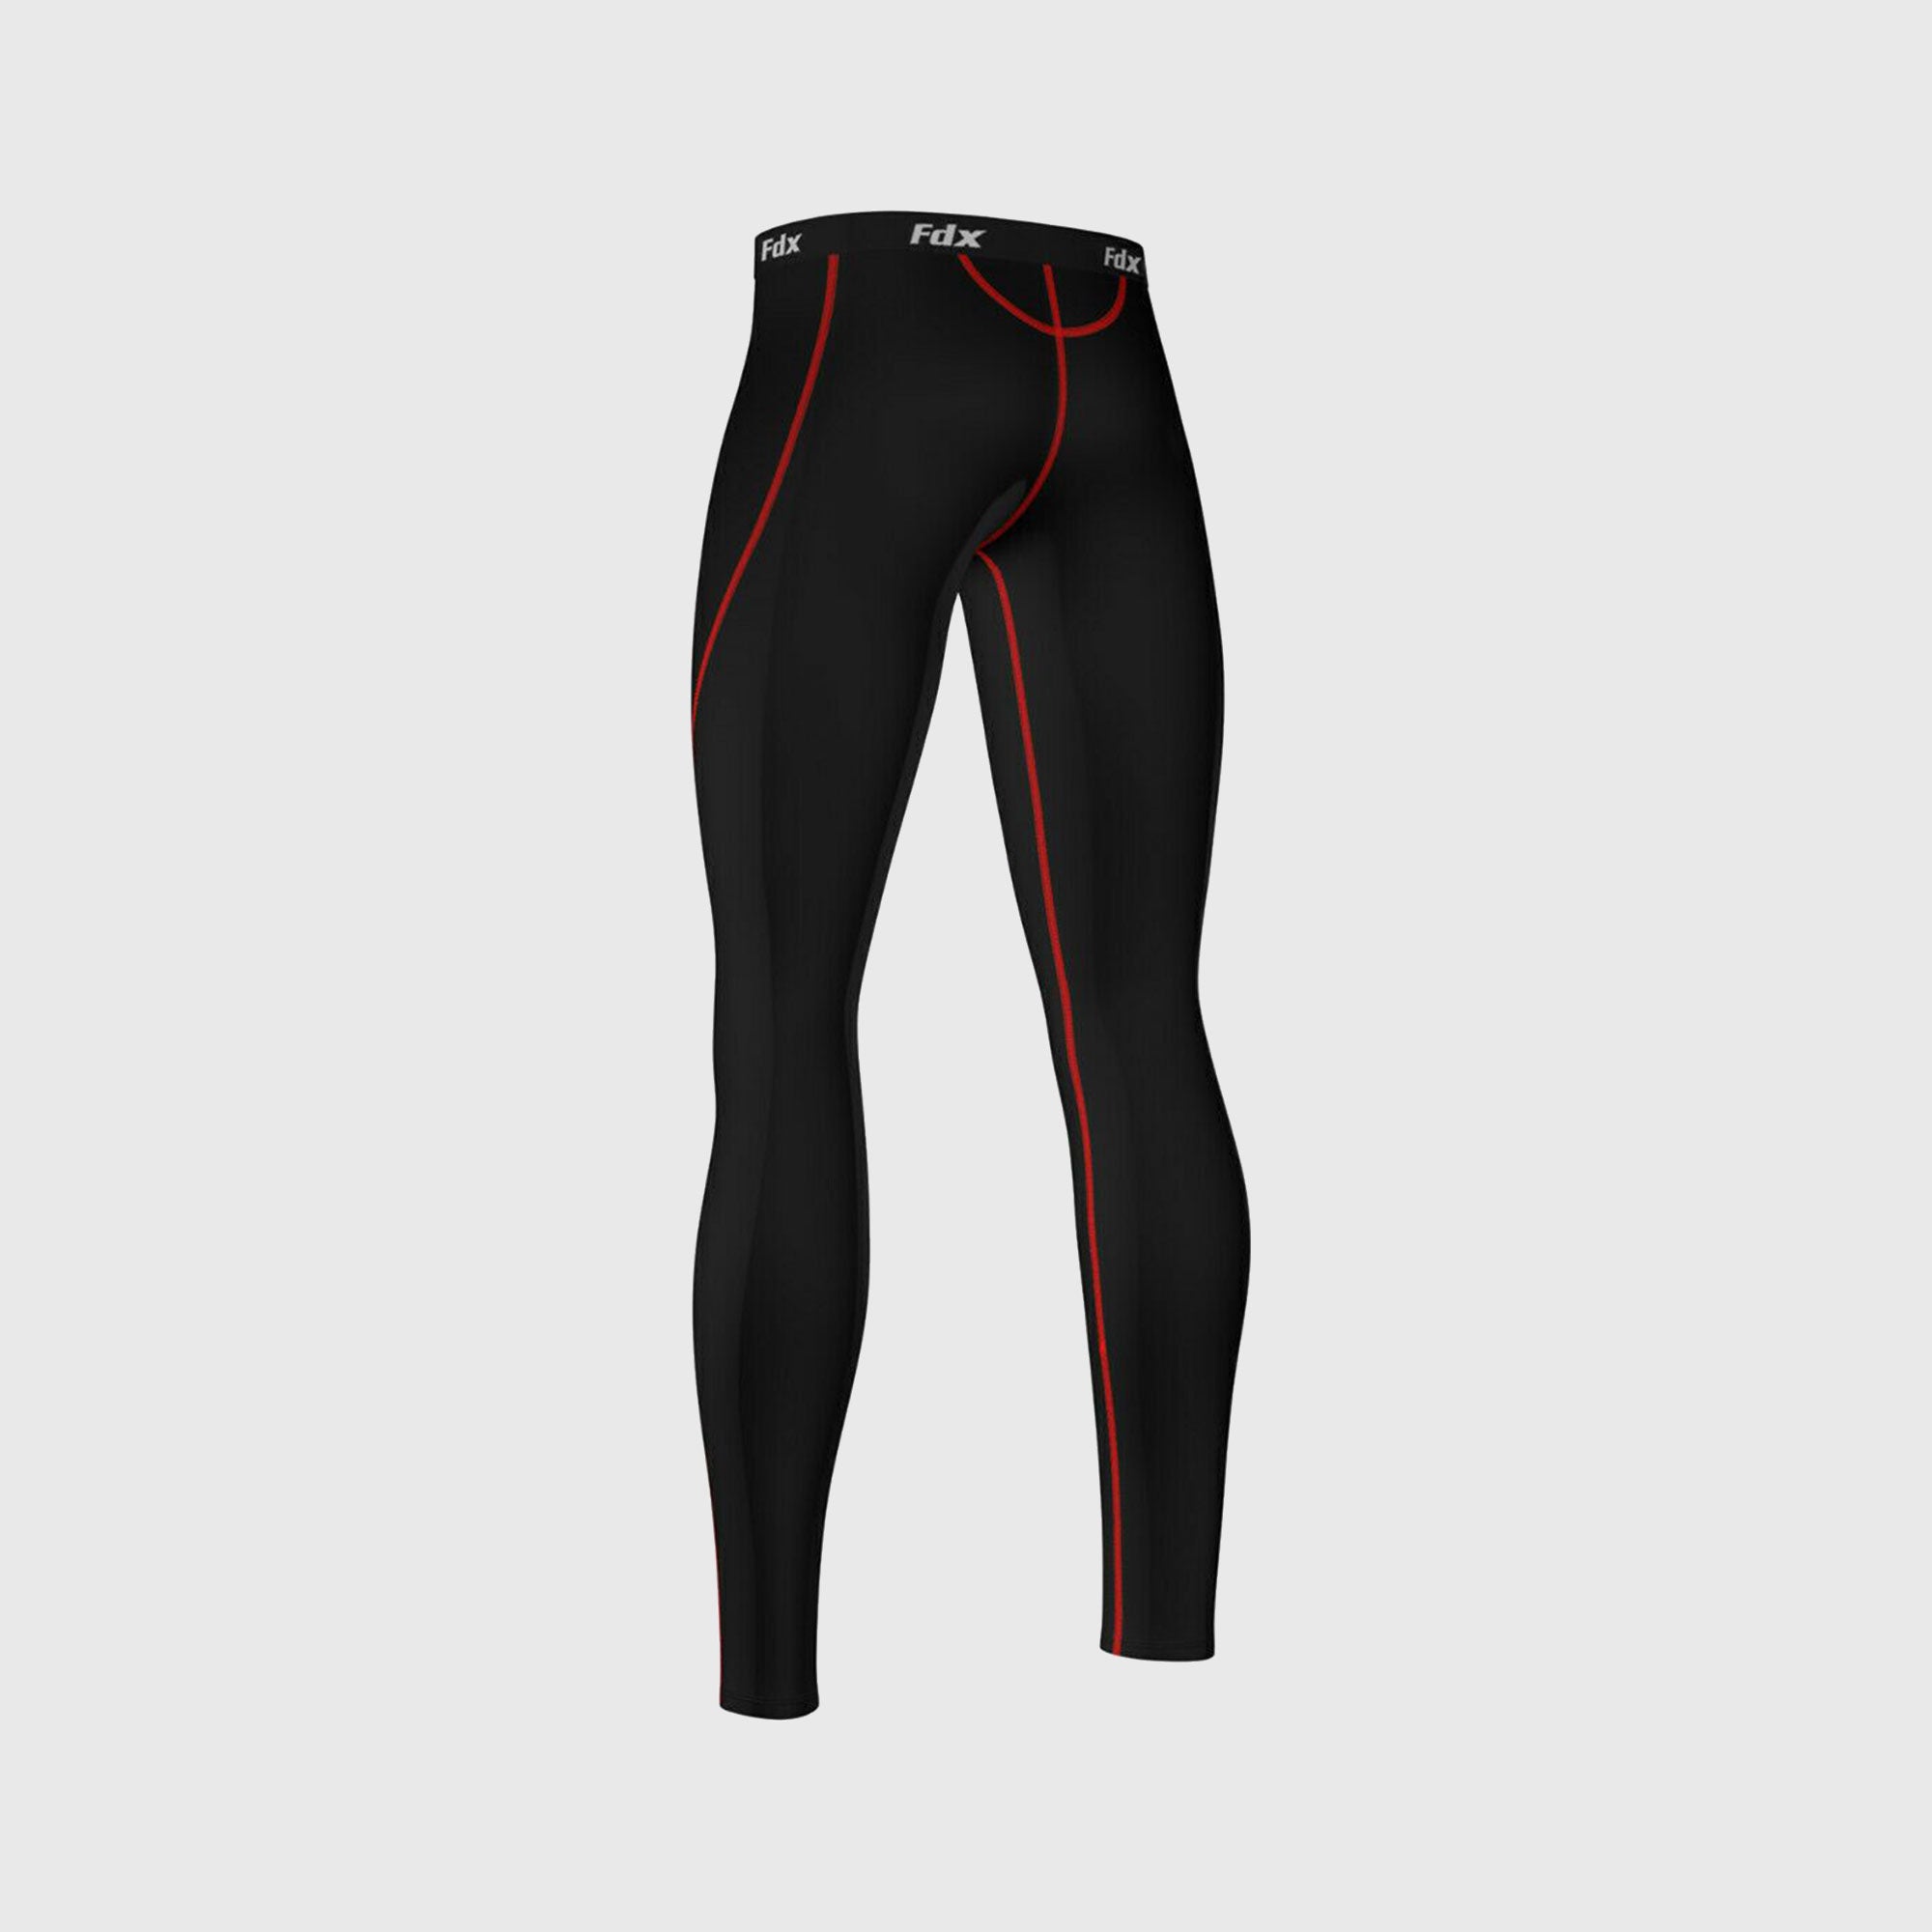 Fdx Black & Red Compression Tights Leggings Gym Workout Running Athletic Yoga Elastic Waistband Strechable Breathable Training Jogging Pants - Thermolinx